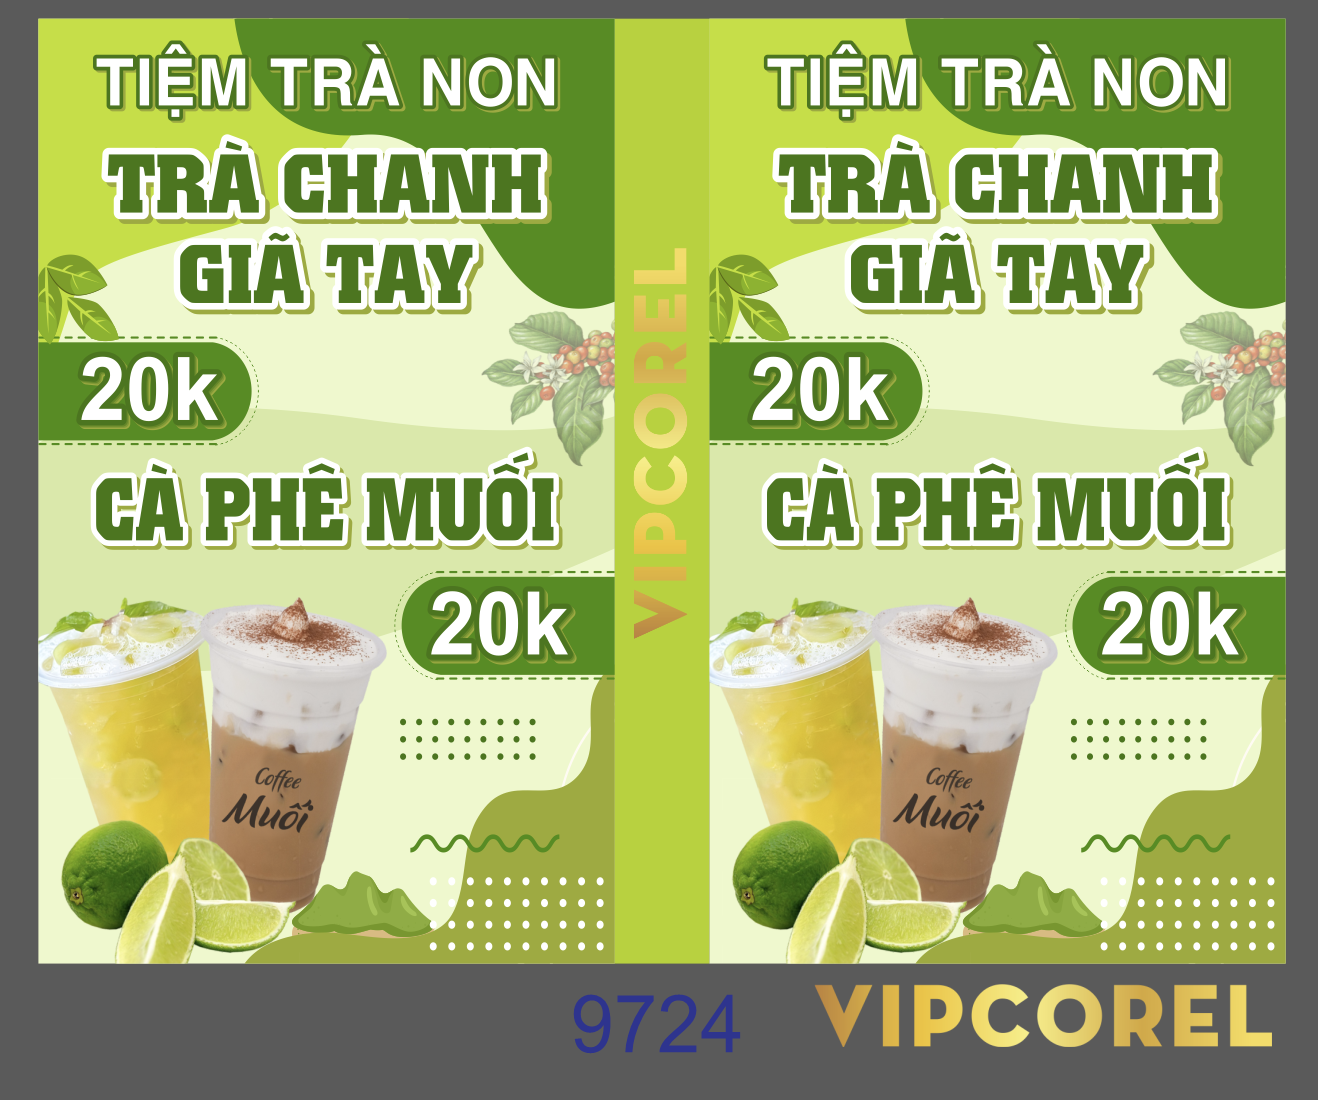 tiem tra non - tra chanh gia tay.png